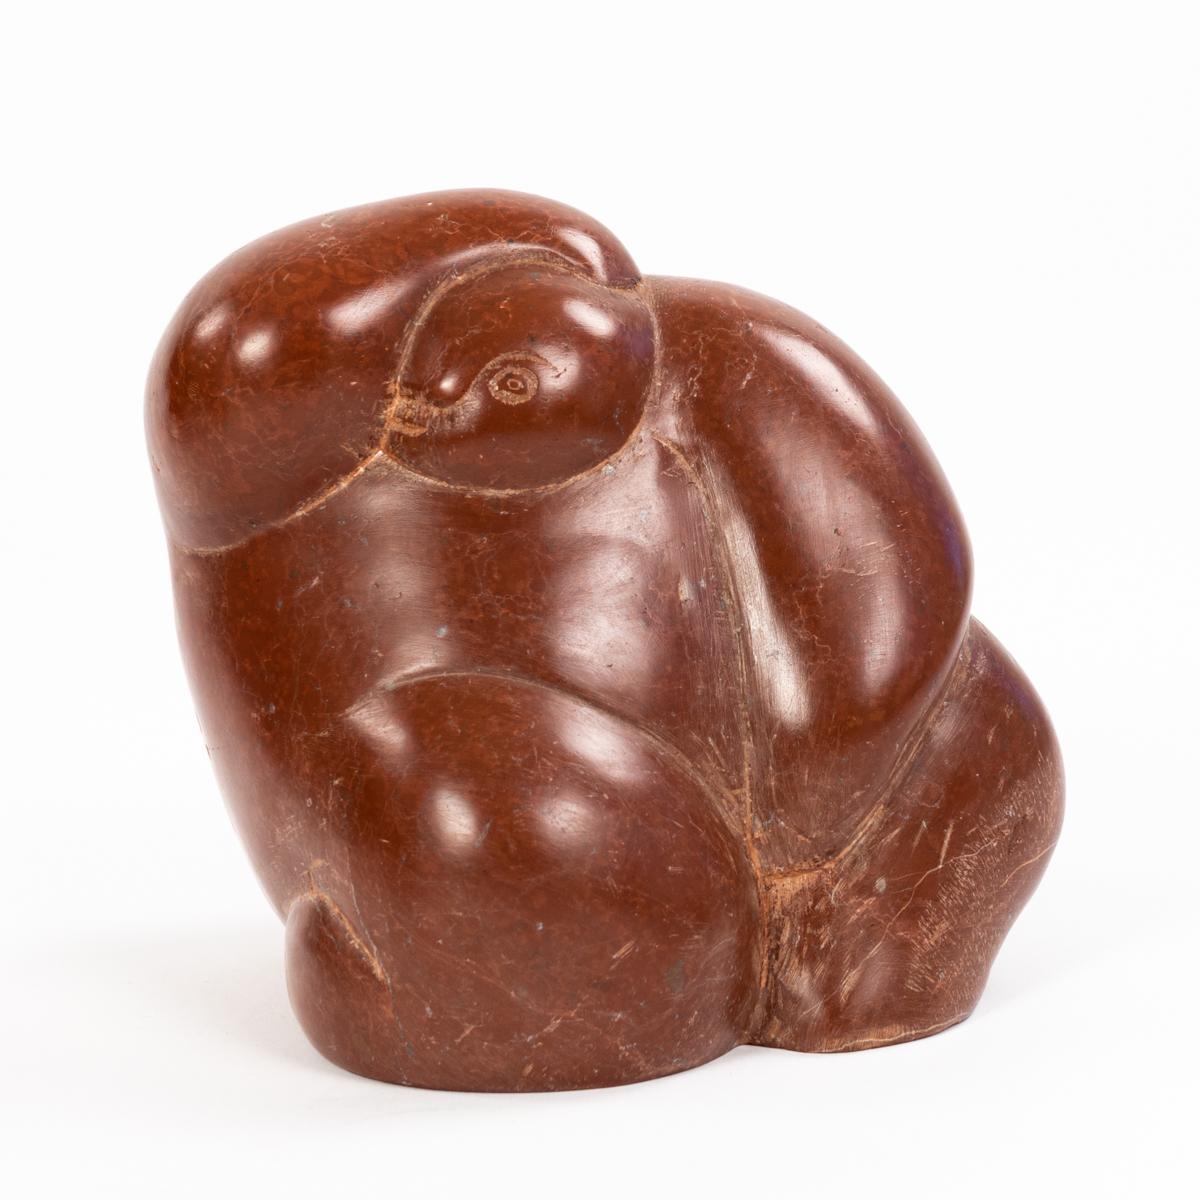 Cubist figurative French mid-century sculpture in brown-red stone, signed.
The round shaped object shows a figure like a sketch with one arm above the head and the other between the legs.
The object is organically round and thus has a soft, almost